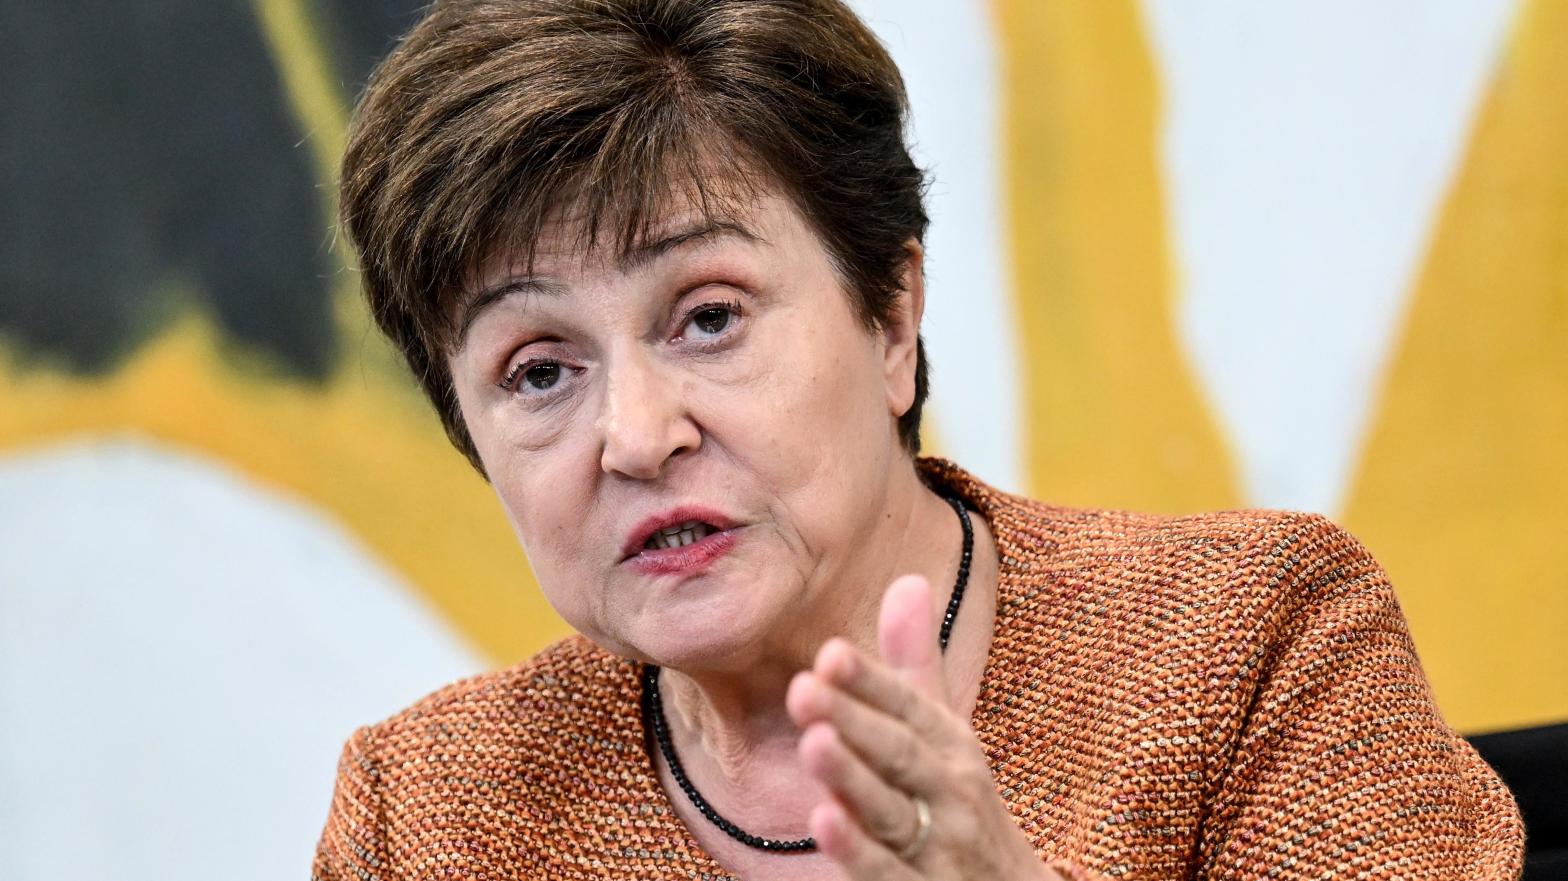 Kristalina Georgieva, the Managing Director of the International Monetary Fund, said the IMF supports countries with their own, monetarily backed digital currencies. (Photo: Britta Pedersen/picture-alliance/dpa, AP)